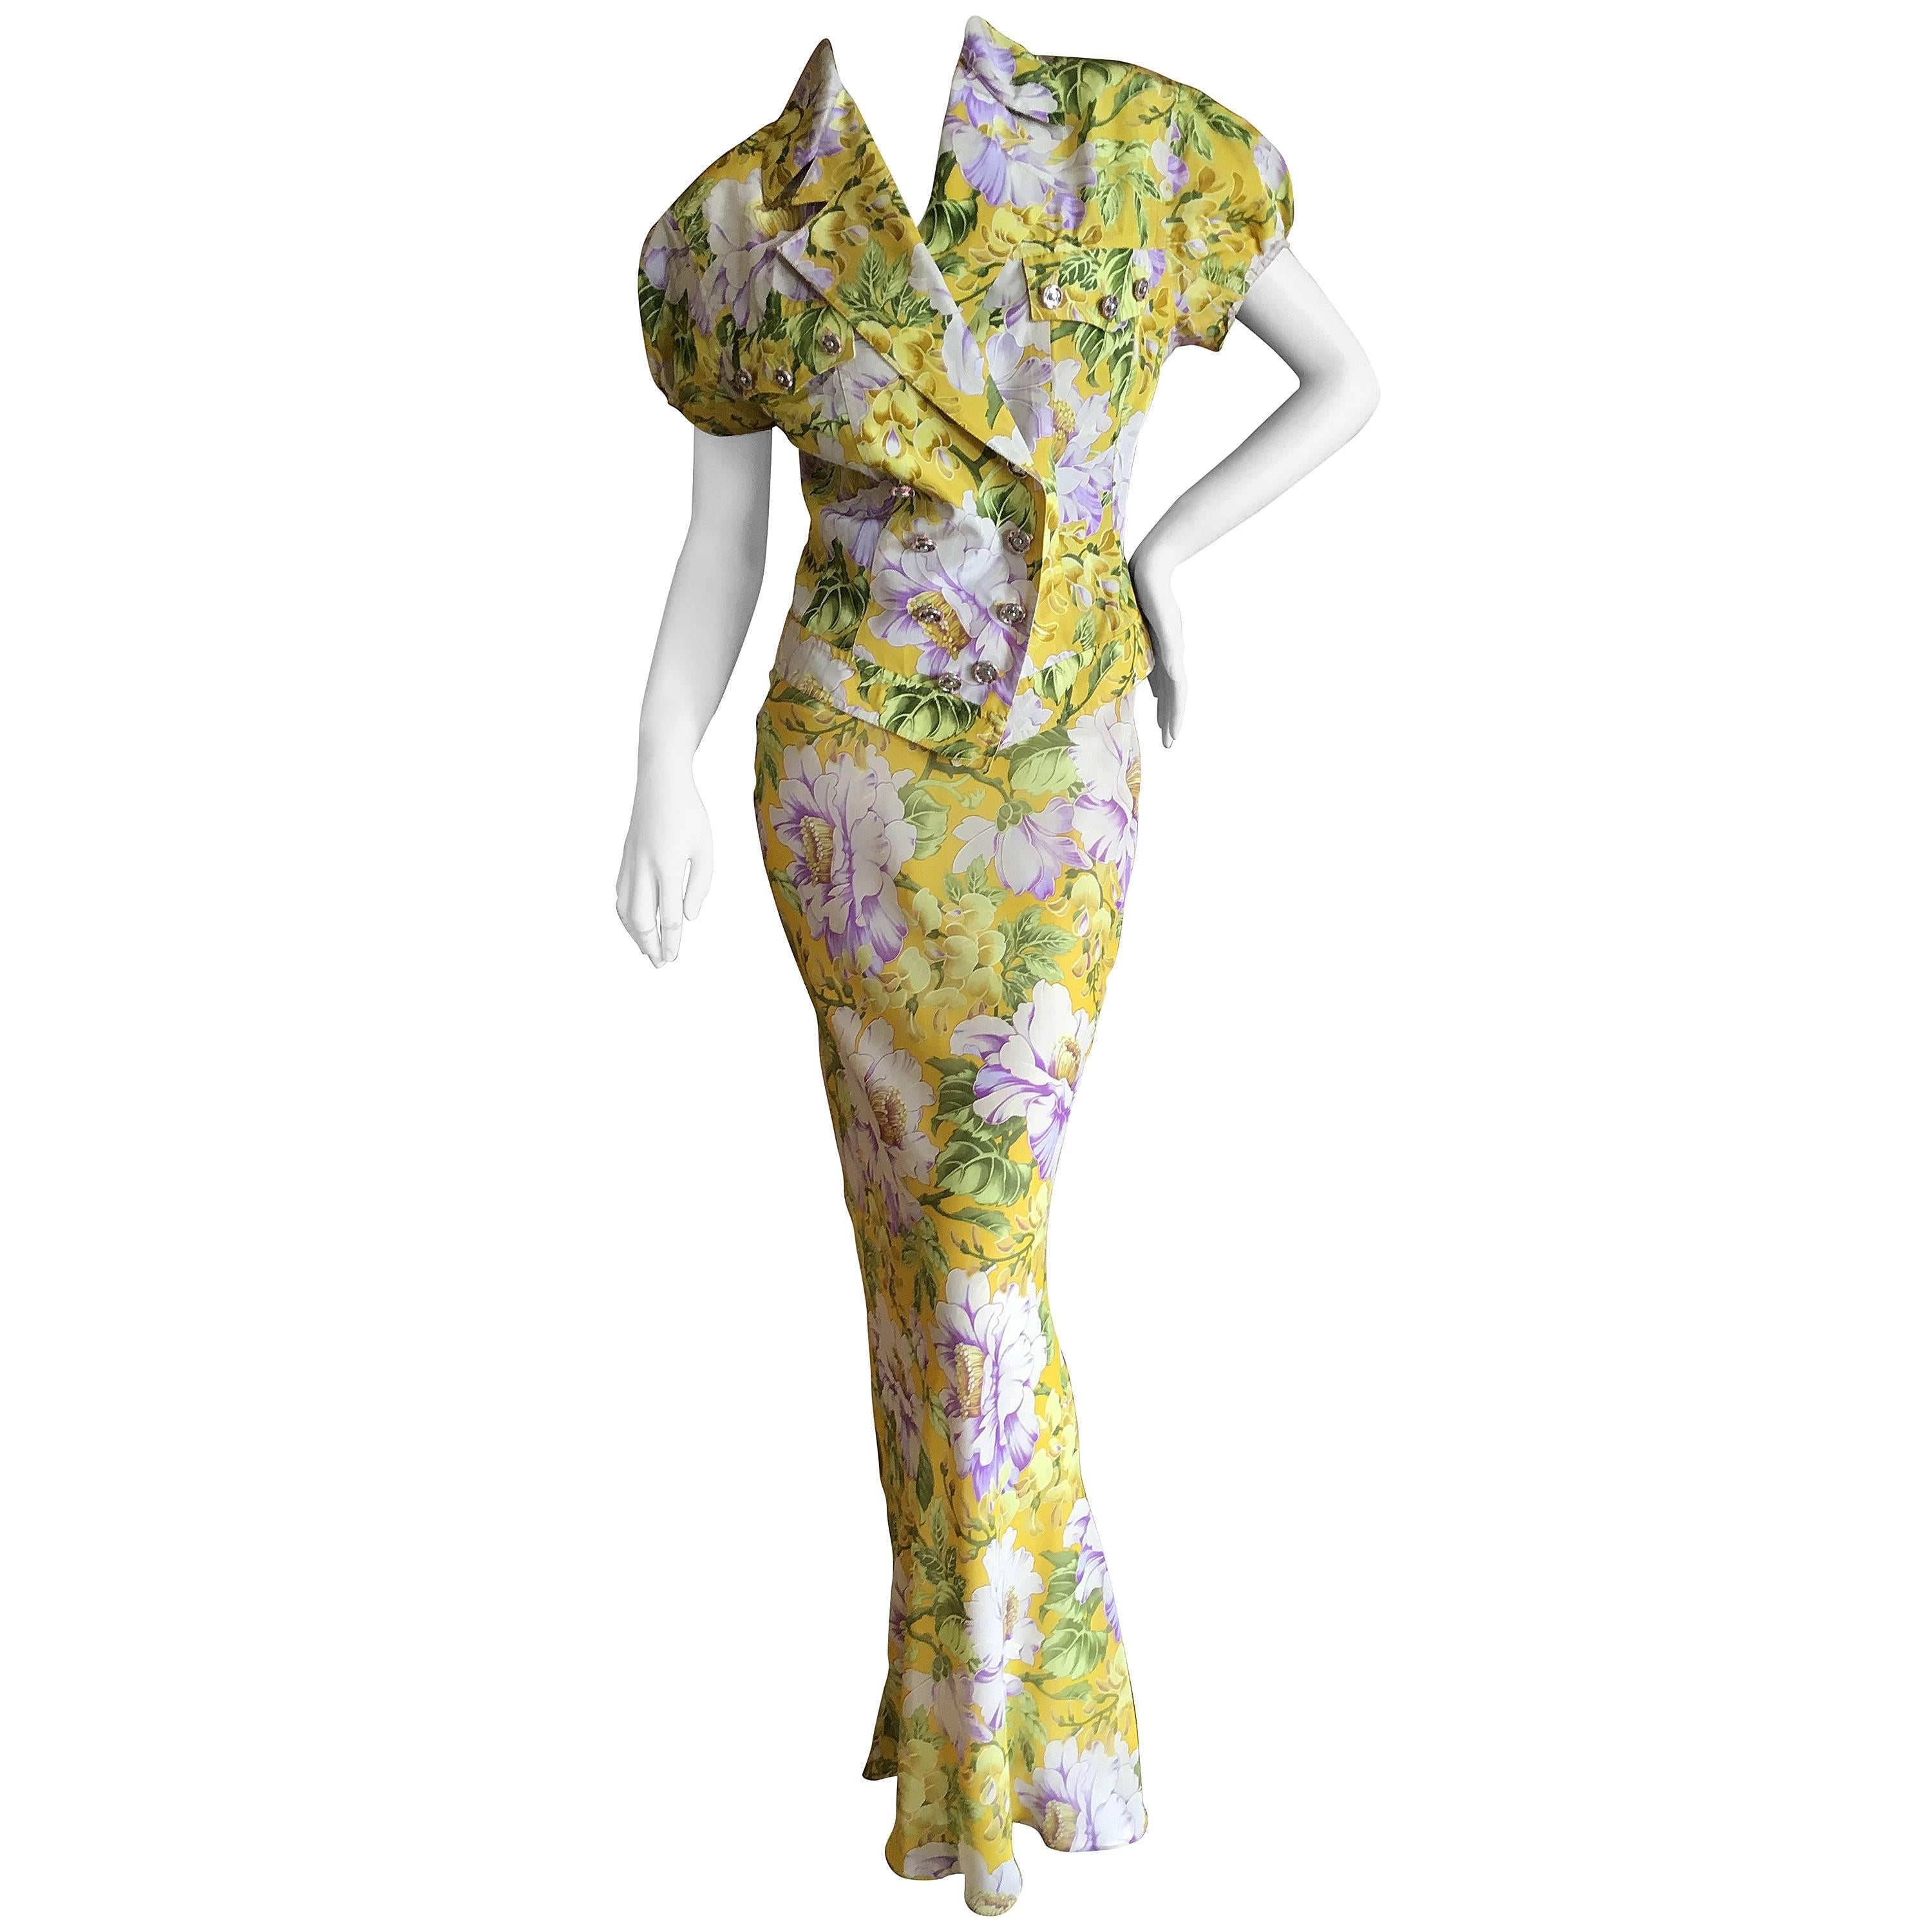 John Galliano Late 1980's Bias Cut Floral Dress with Matching Jacket